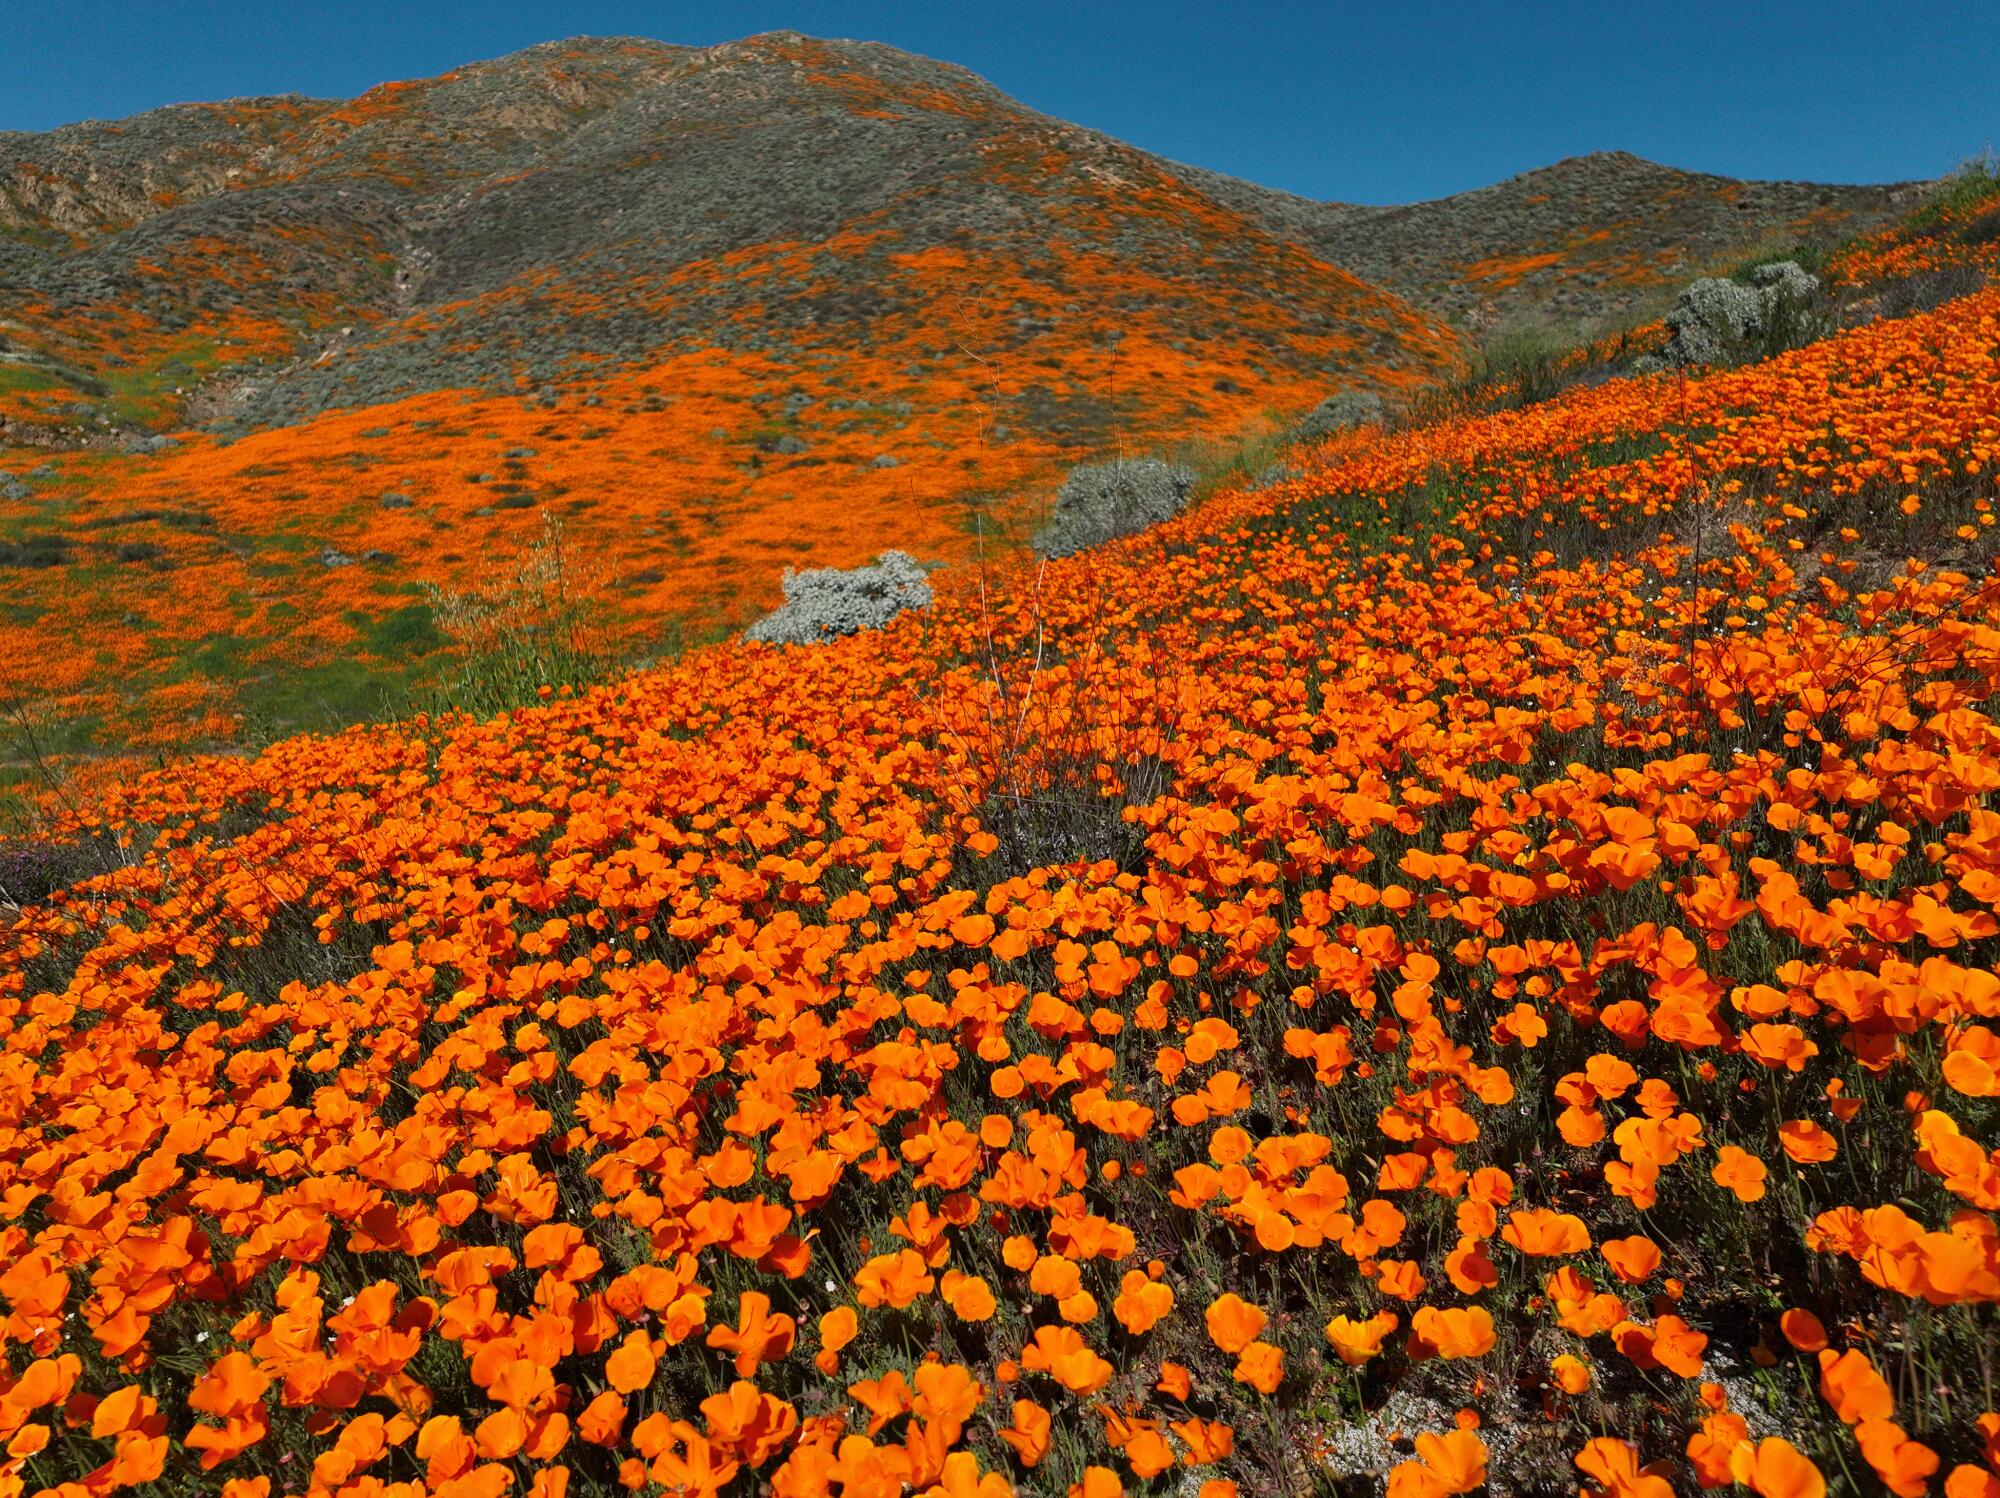 A close-up view of the spring California Poppies blooming early this year